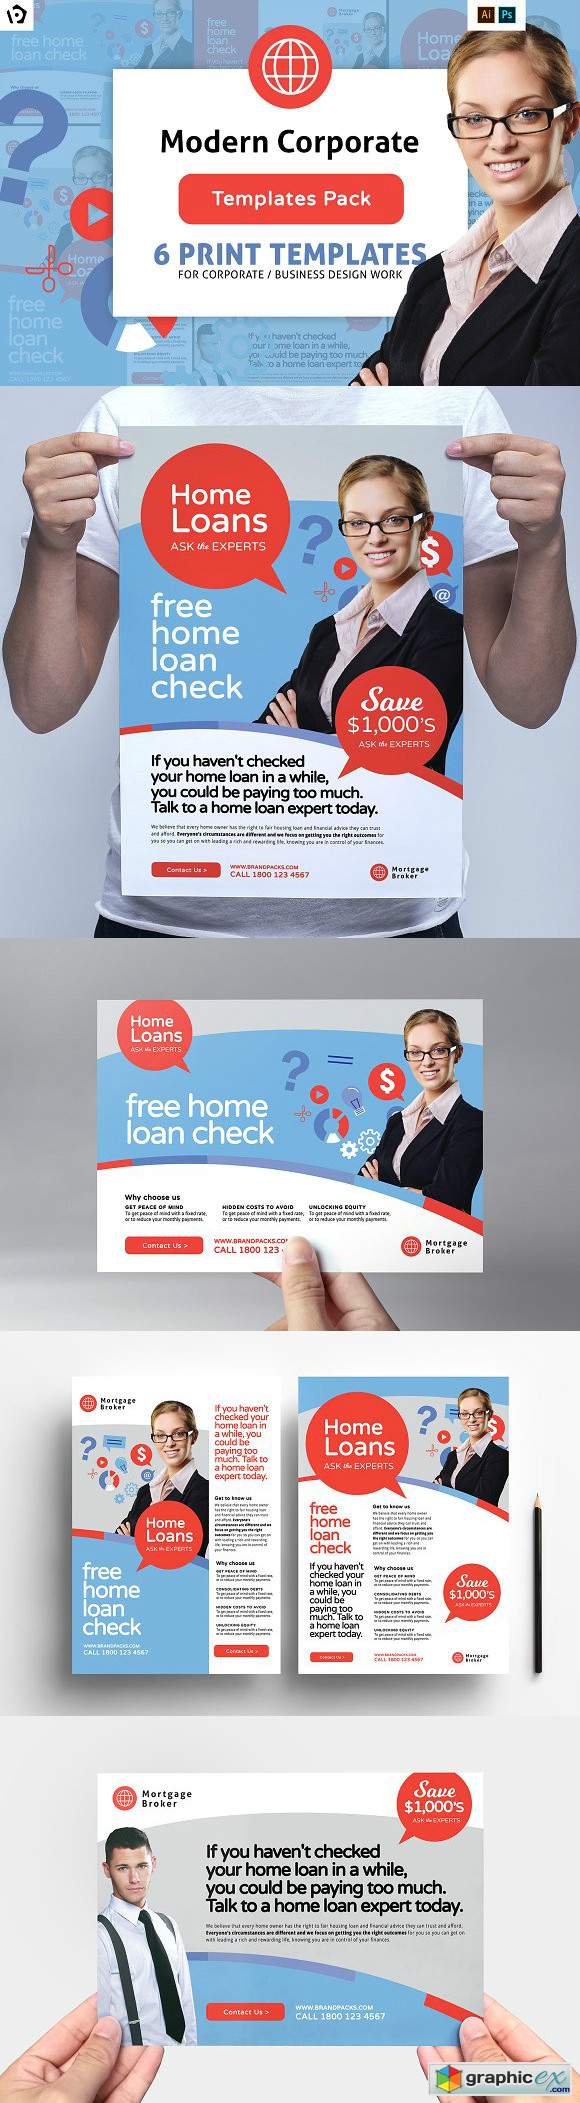 Corporate Templates Pack